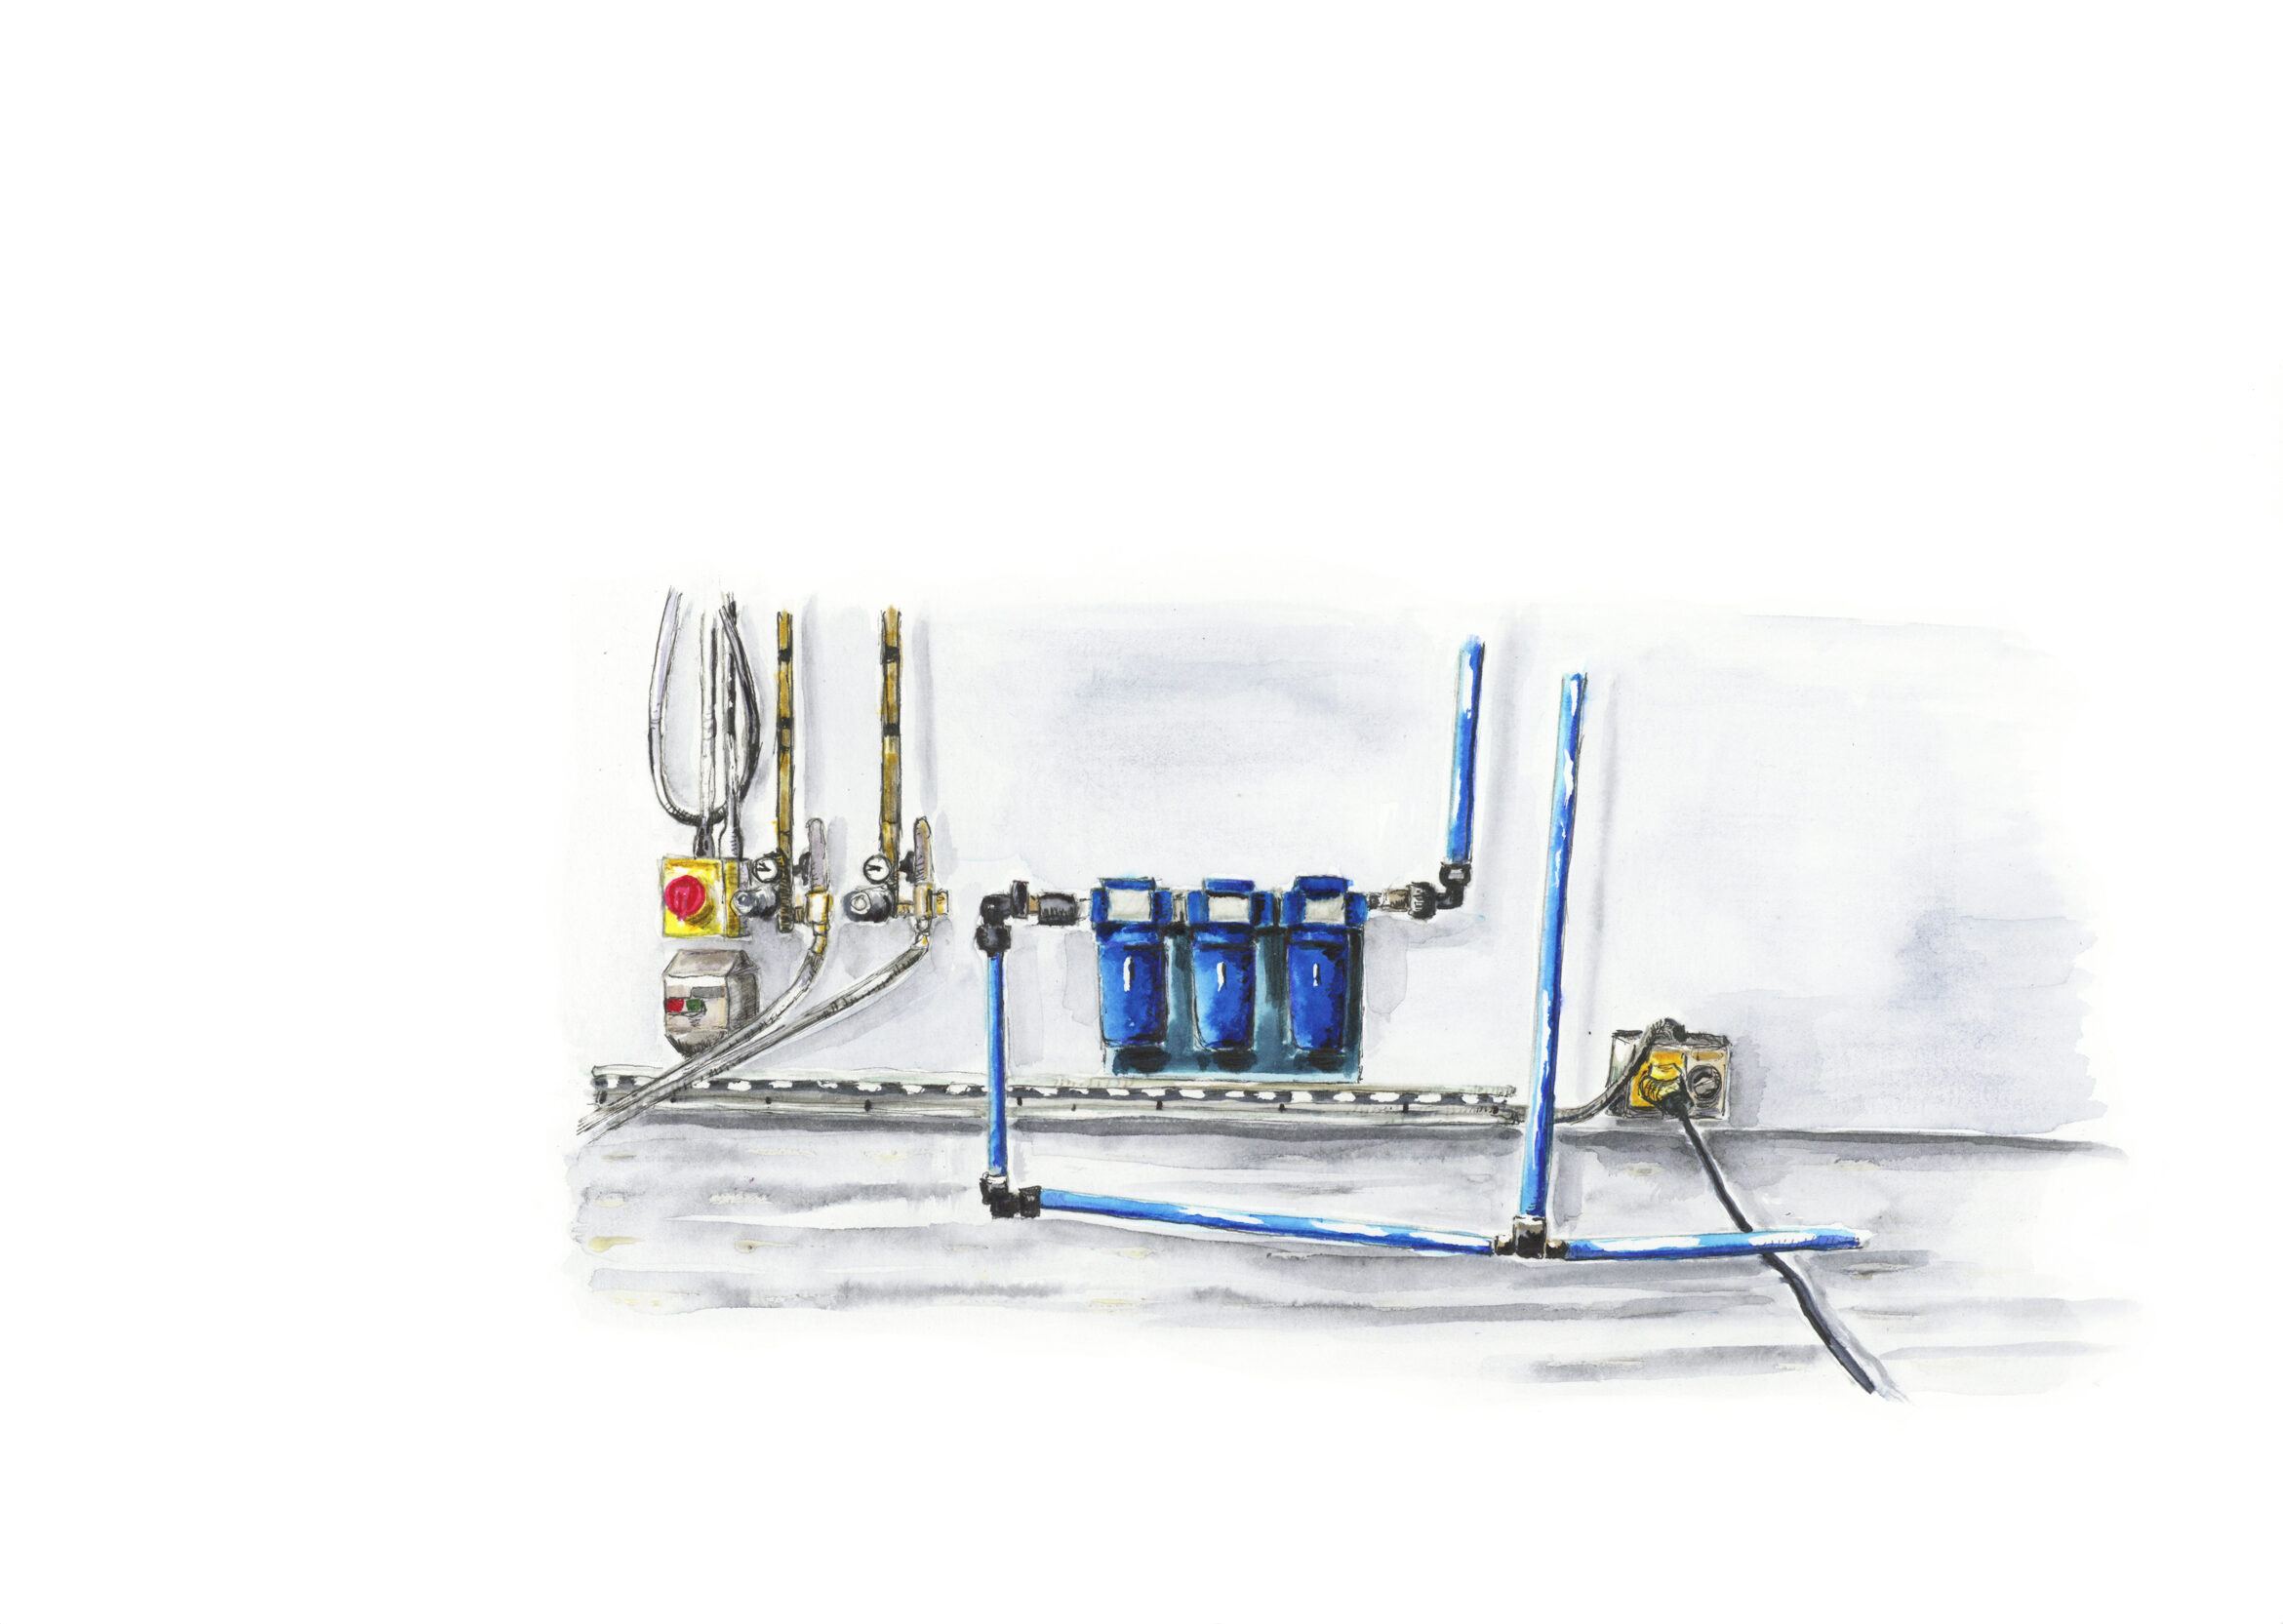 Watercolour and Ink. <br/> A4. <br/>These works are about the relationship between people and their workplace. They document the visual culture of infrastructure, and the way mobile equipment and PPE is left to rest within it. <br/>Fleeting moments of rest for the ambulatory elements of an industrial environment are solidified by gentle water-based observations. Humorous and poetic compositions are formed when the handling of tools and apparatus seems to be at its most incidental to the wider manufacturing task at hand. This is contradicted by the recording of moments of total intent and necessity, in the perfect stacking of pallets and storage of items in designated areas. The works create a rare moment of peace and simplicity within in a complex and continuous system.